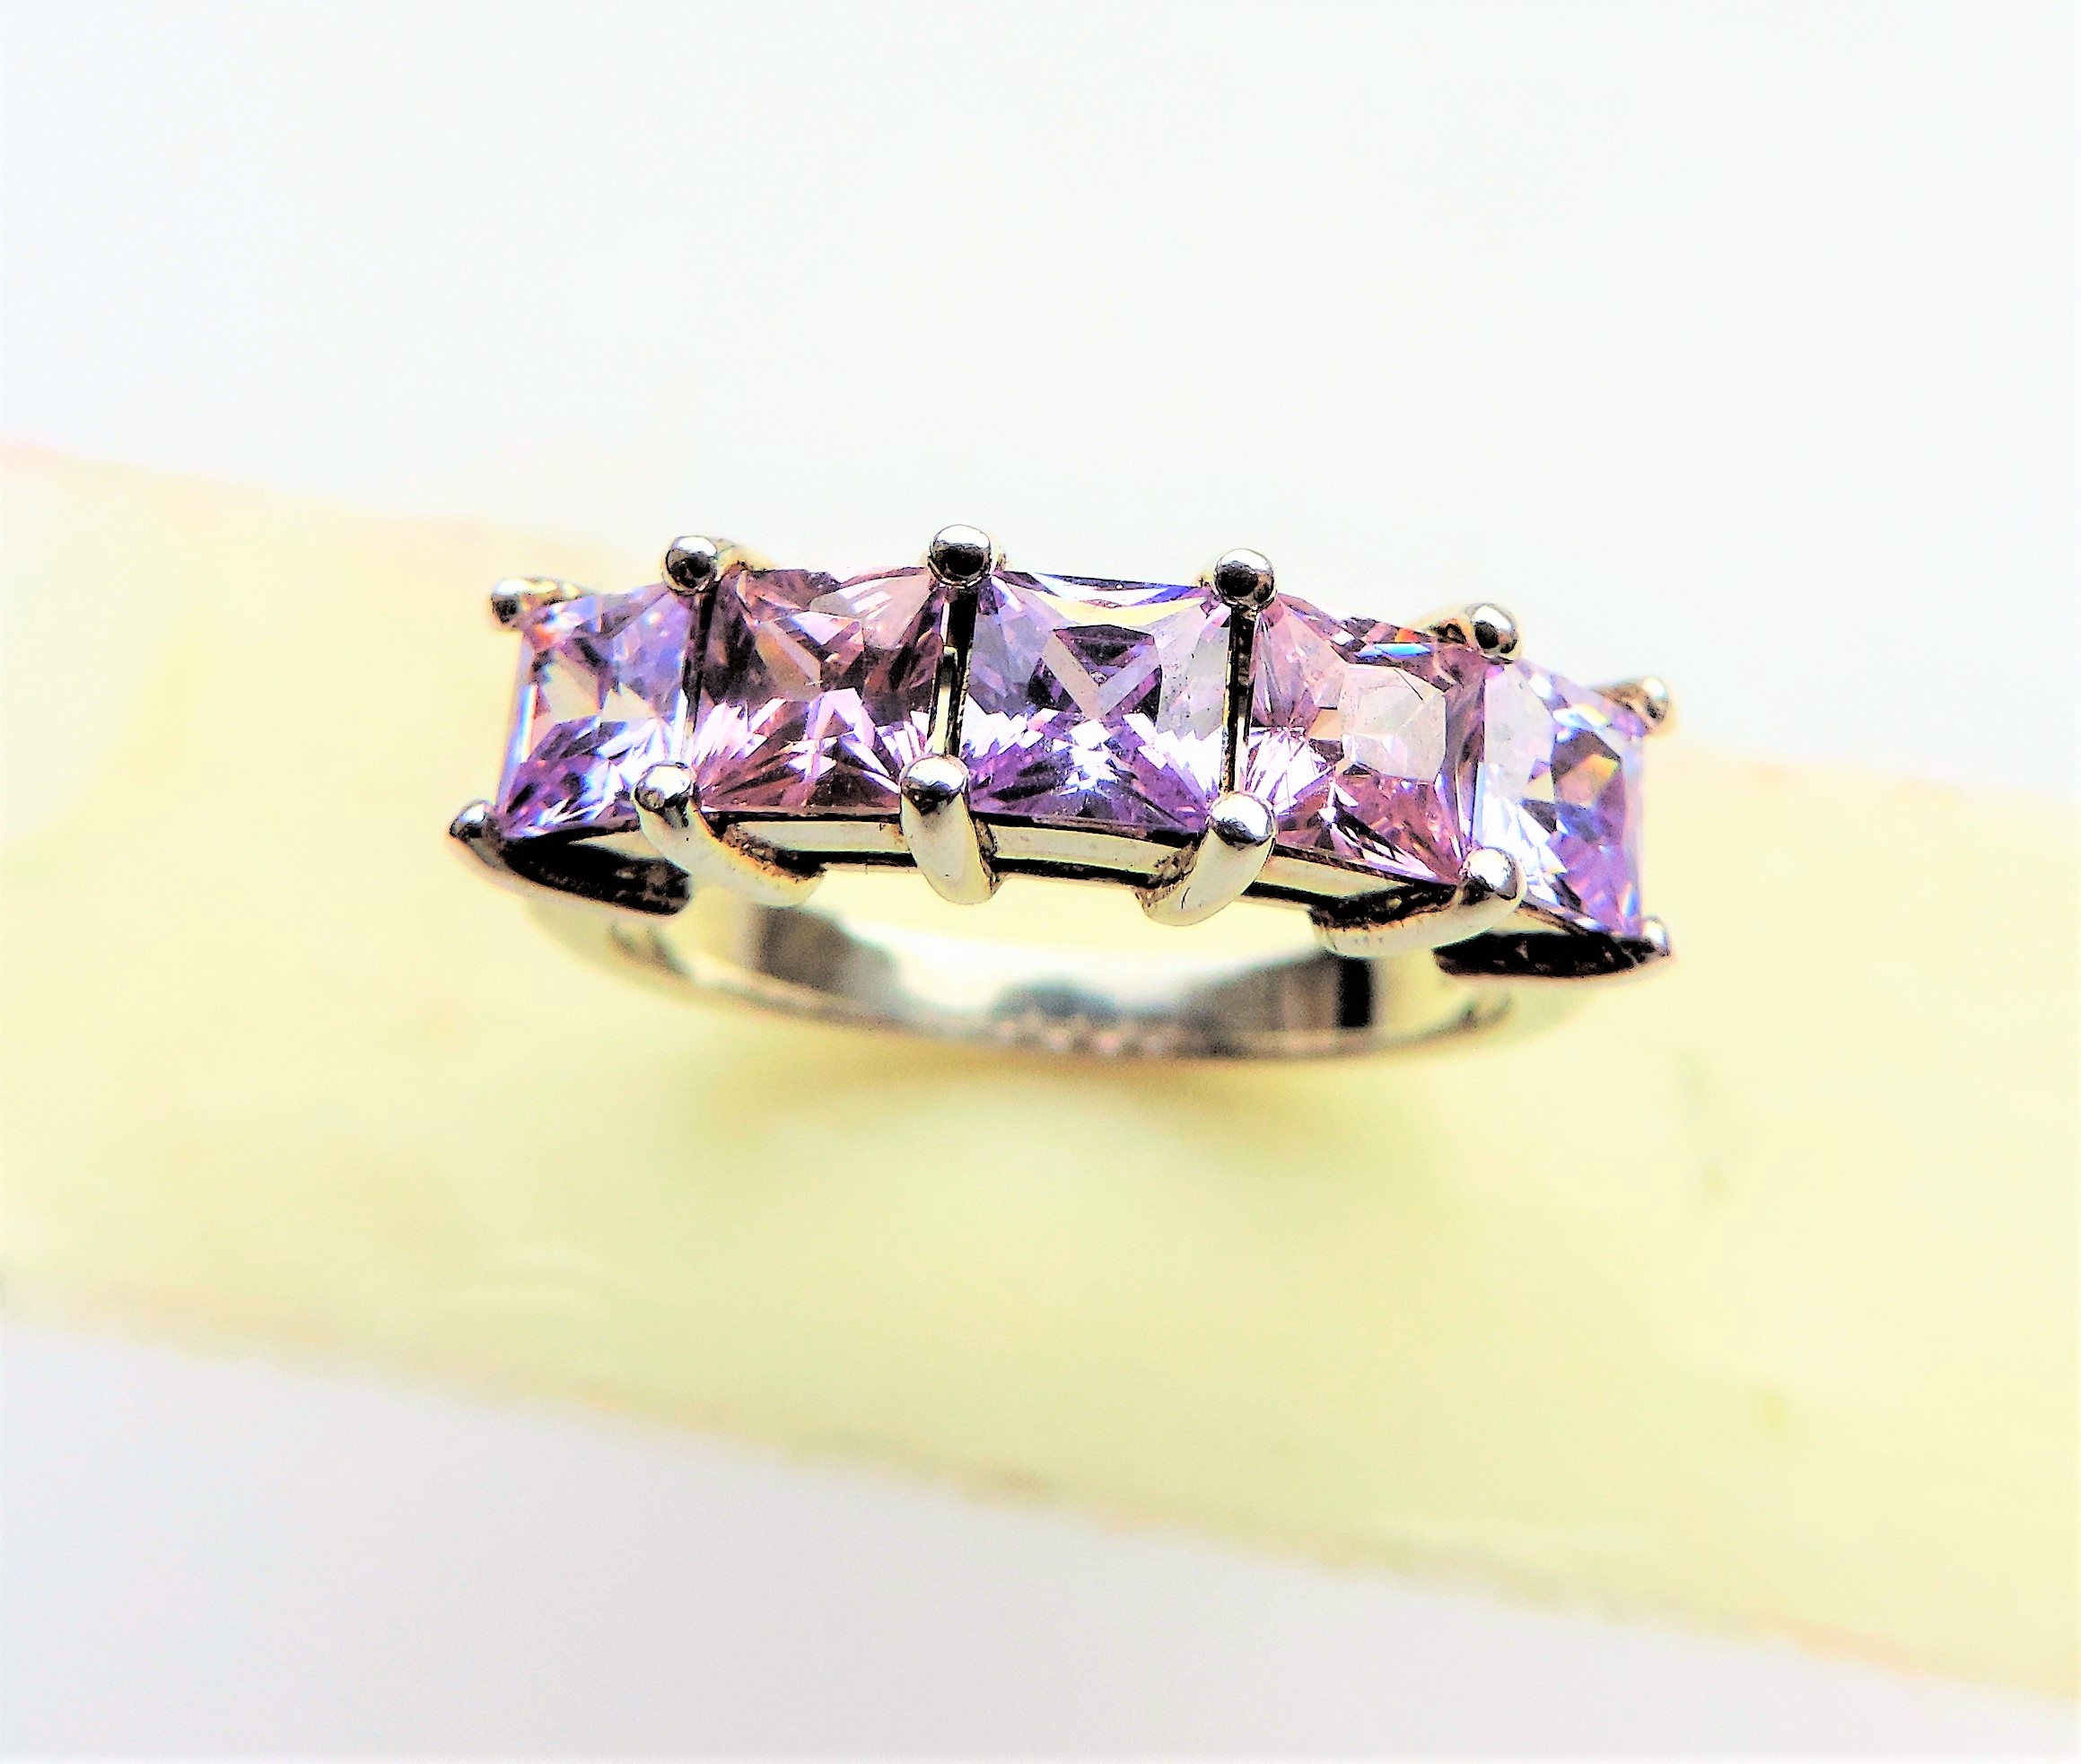 3.75 carat Amethyst & Pink Topaz Ring in Sterling Silver - Image 2 of 4